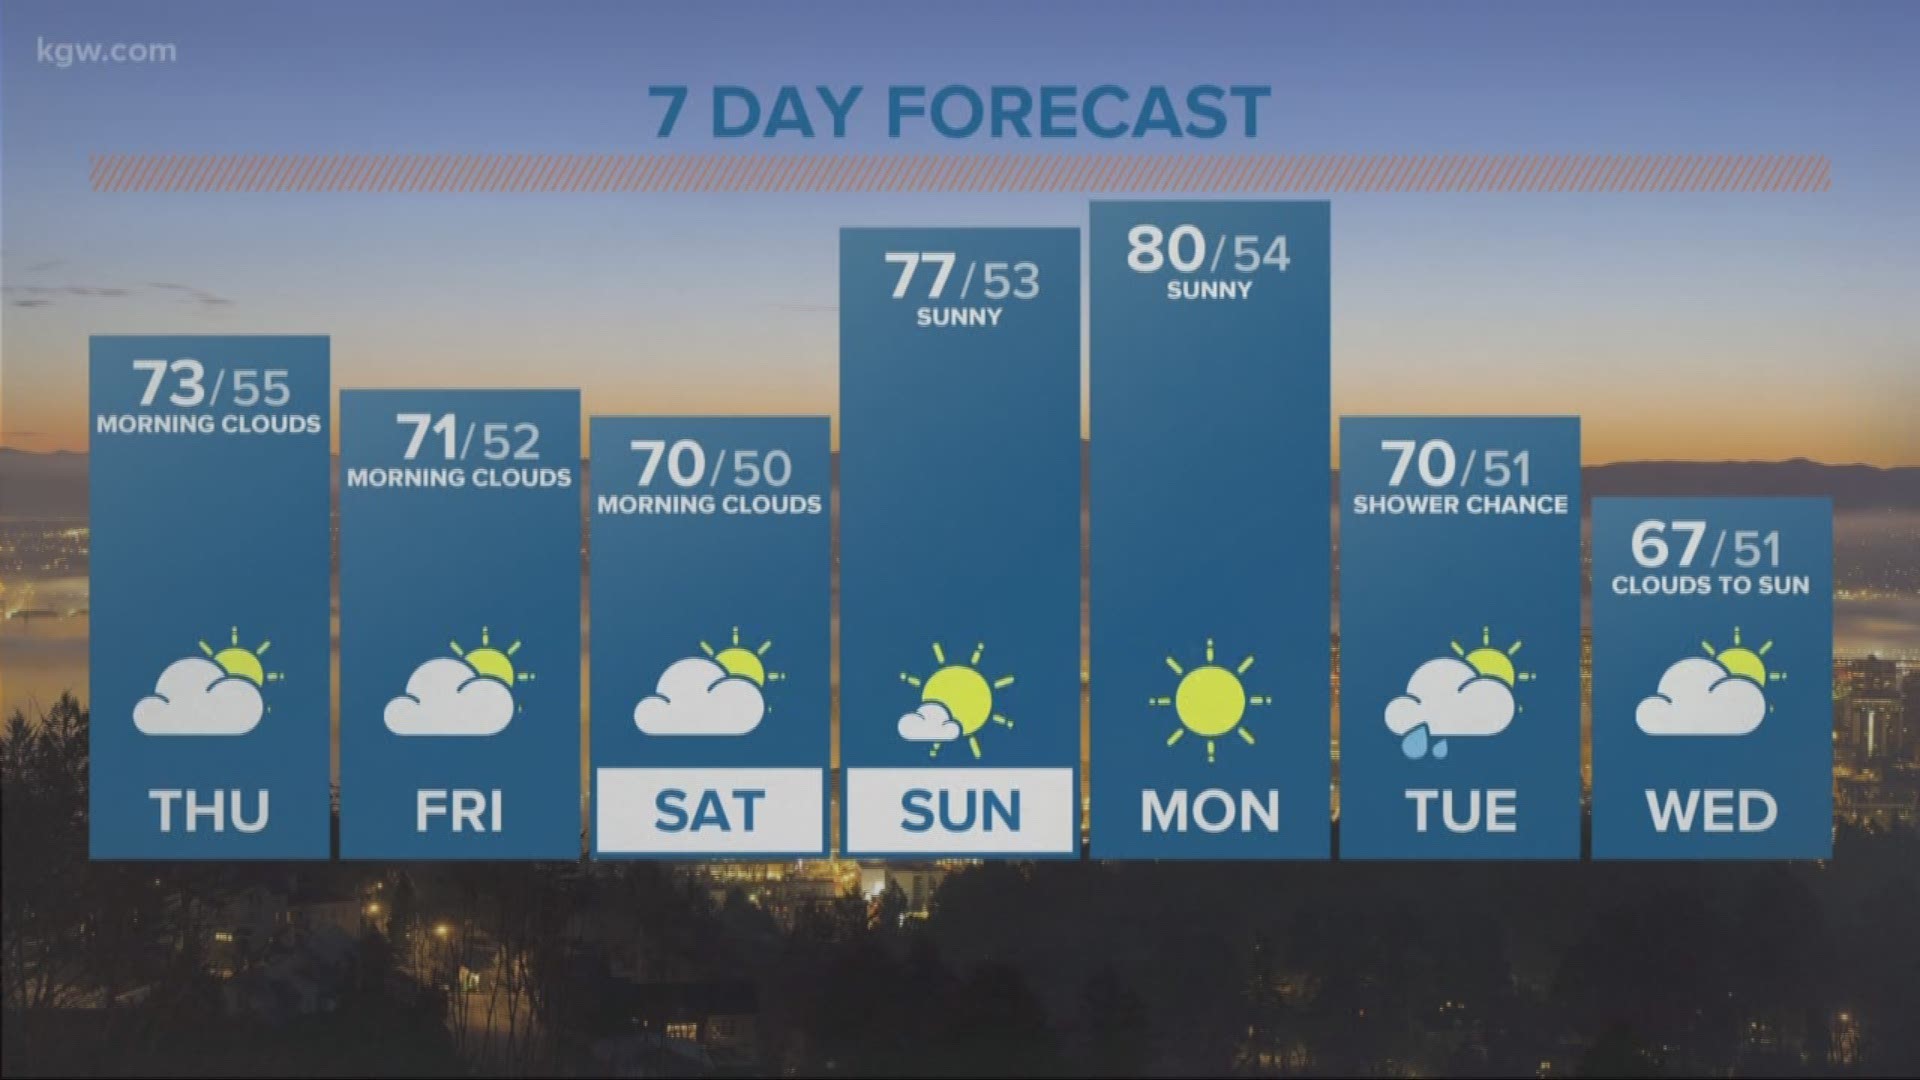 KGW Noon forecast 5-24-18